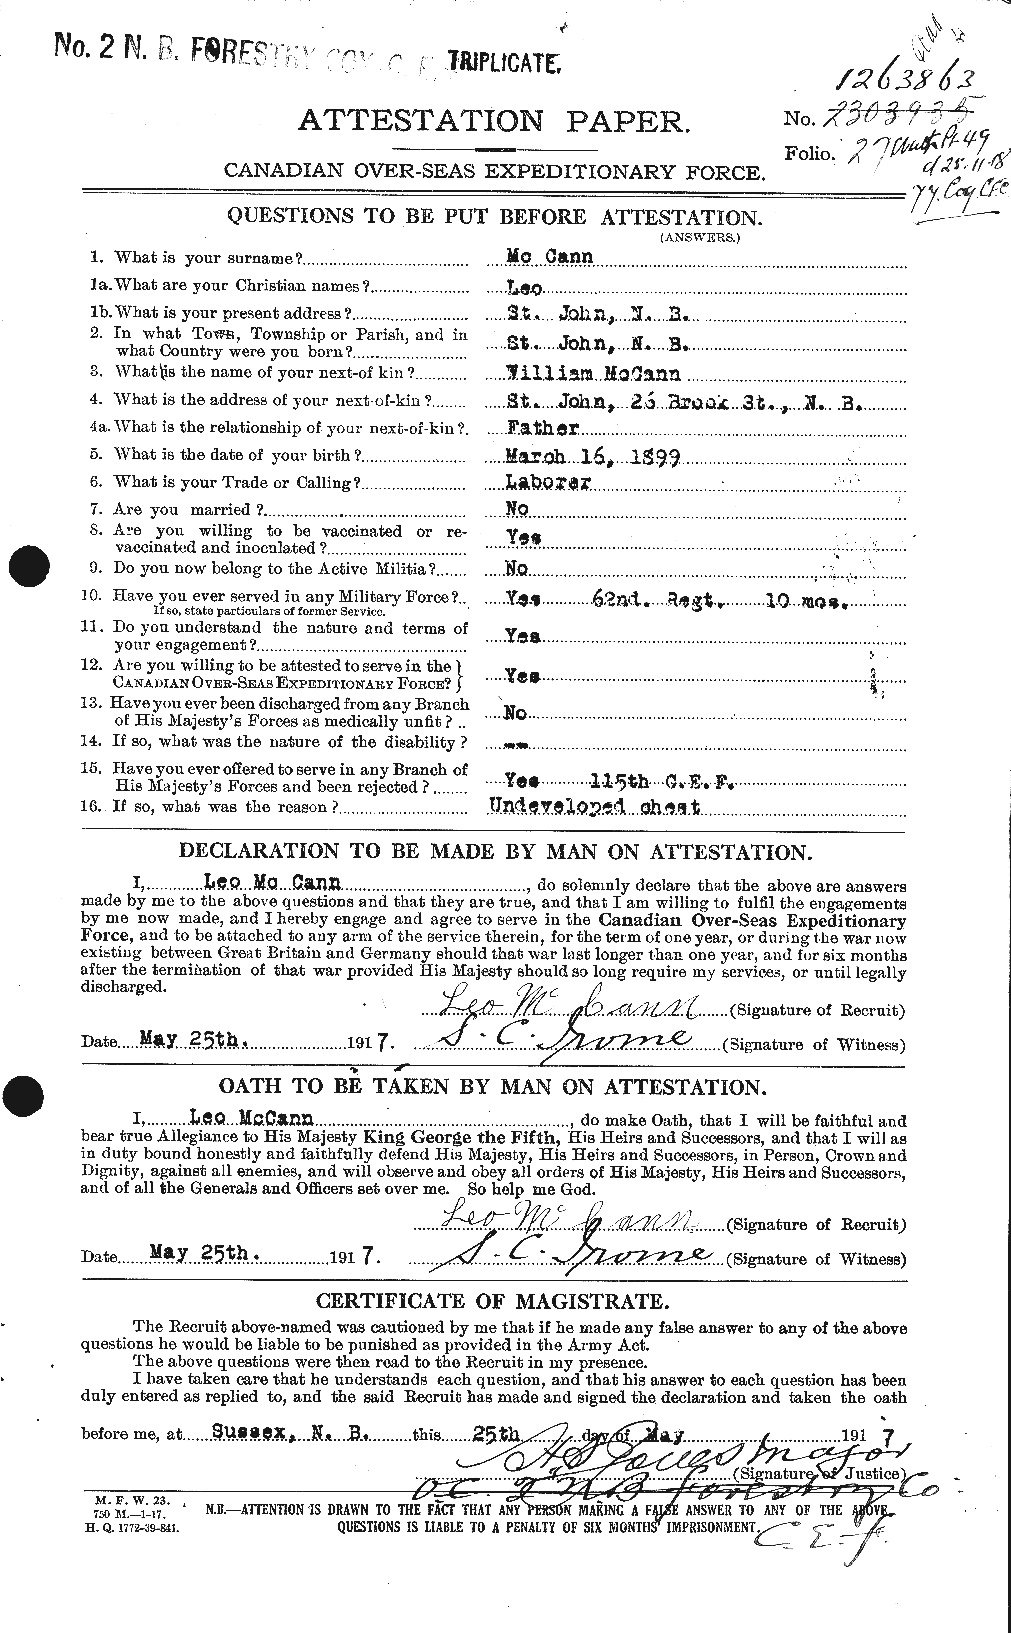 Personnel Records of the First World War - CEF 132705a